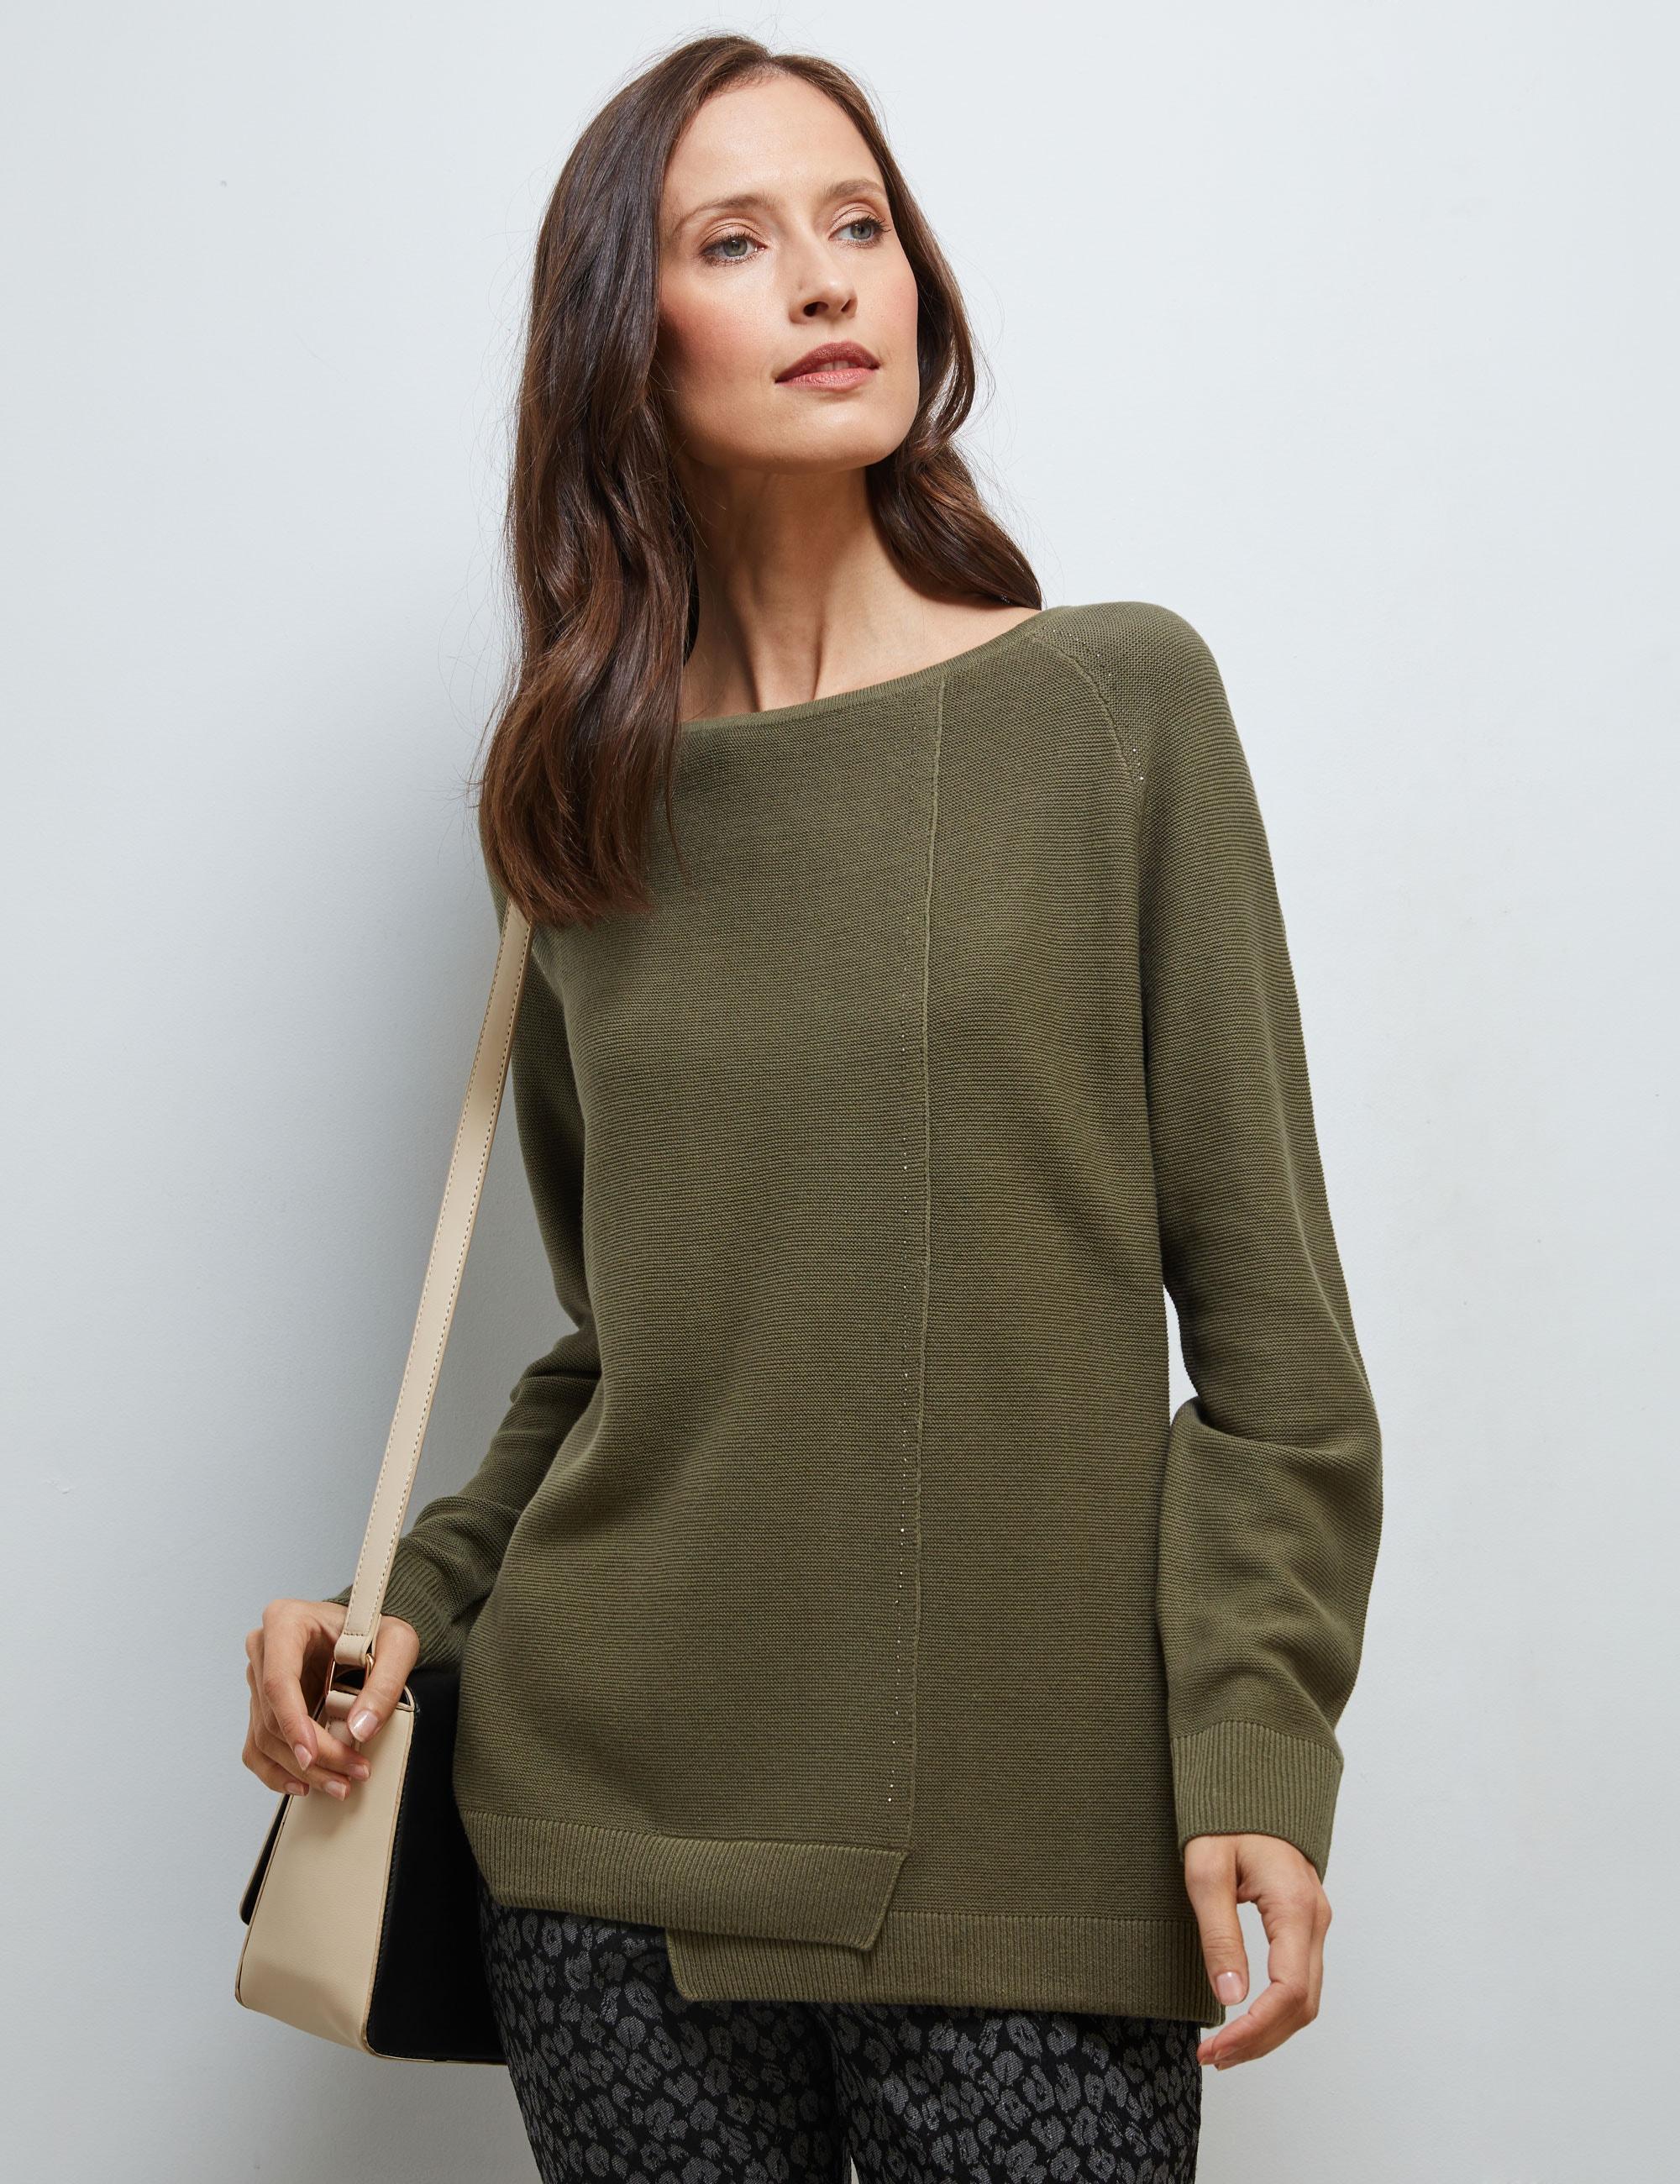 NONI B - Womens Jumper - Winter Sweater - Green Pullover - Cotton Clothing - Long Sleeve - Dusty Olive - Boat Neck - Hotfix Trim - Casual Work Wear